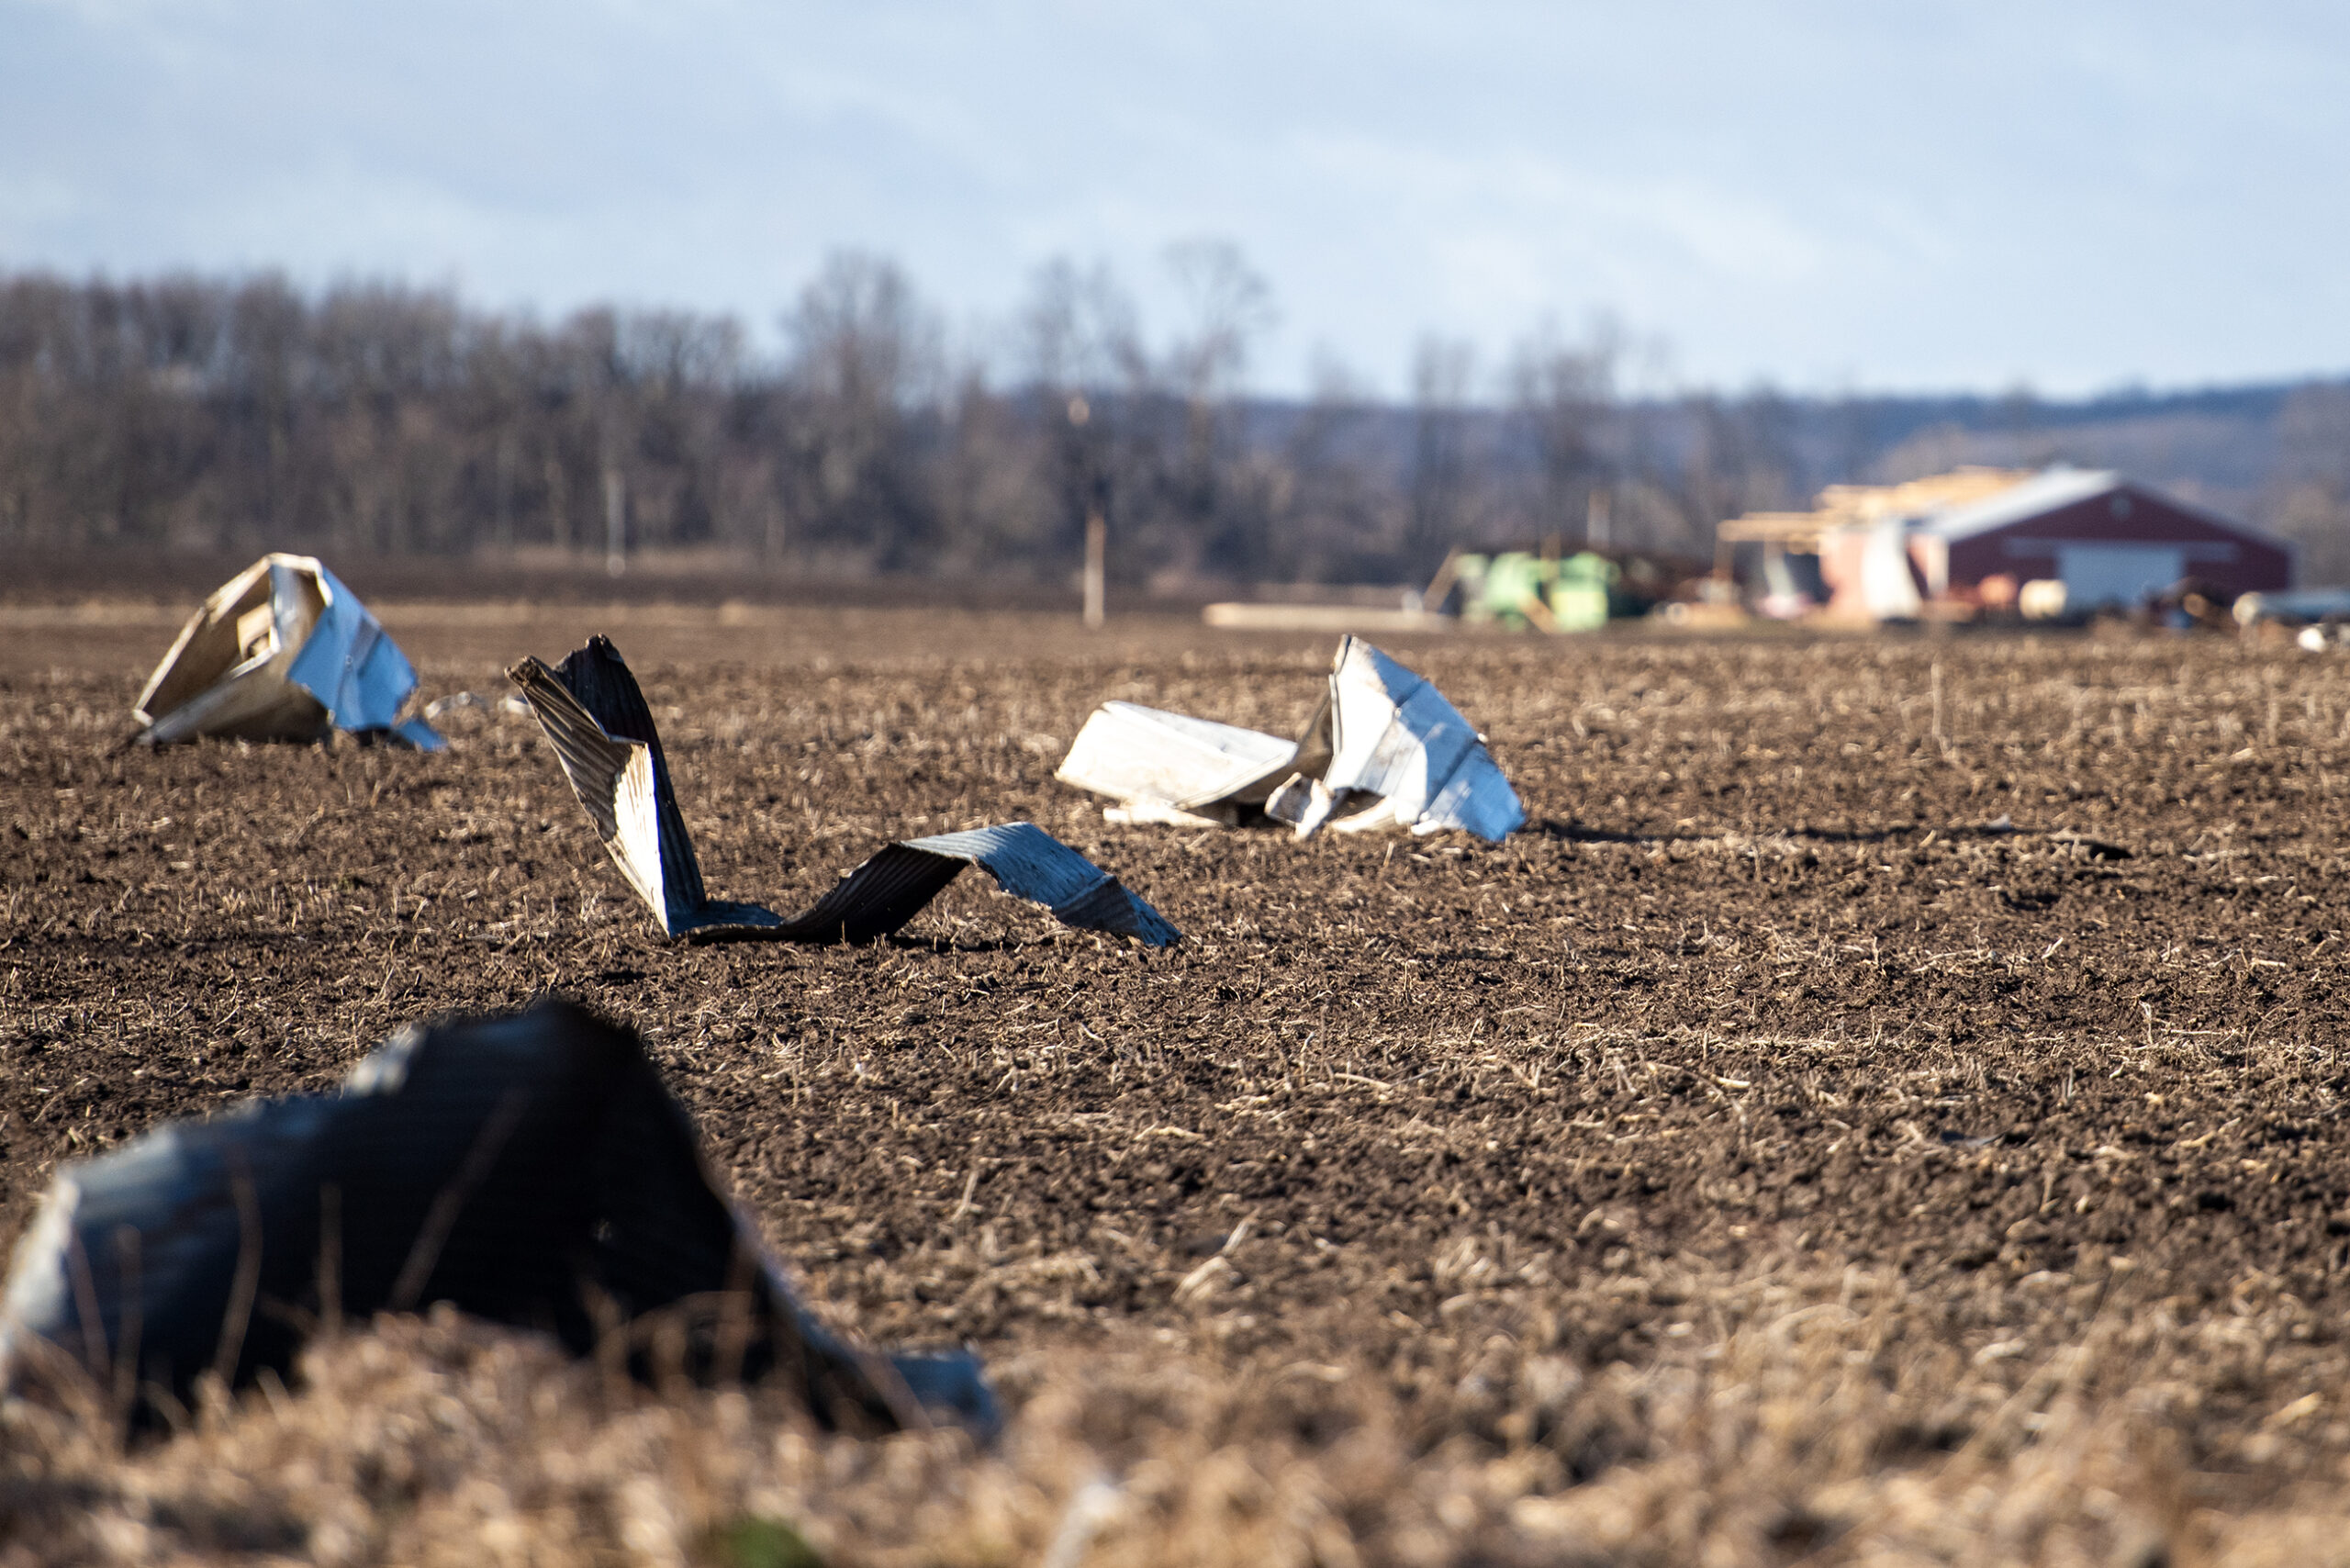 Scraps of structures sit on a large empty field. A barn can be seen in the background.